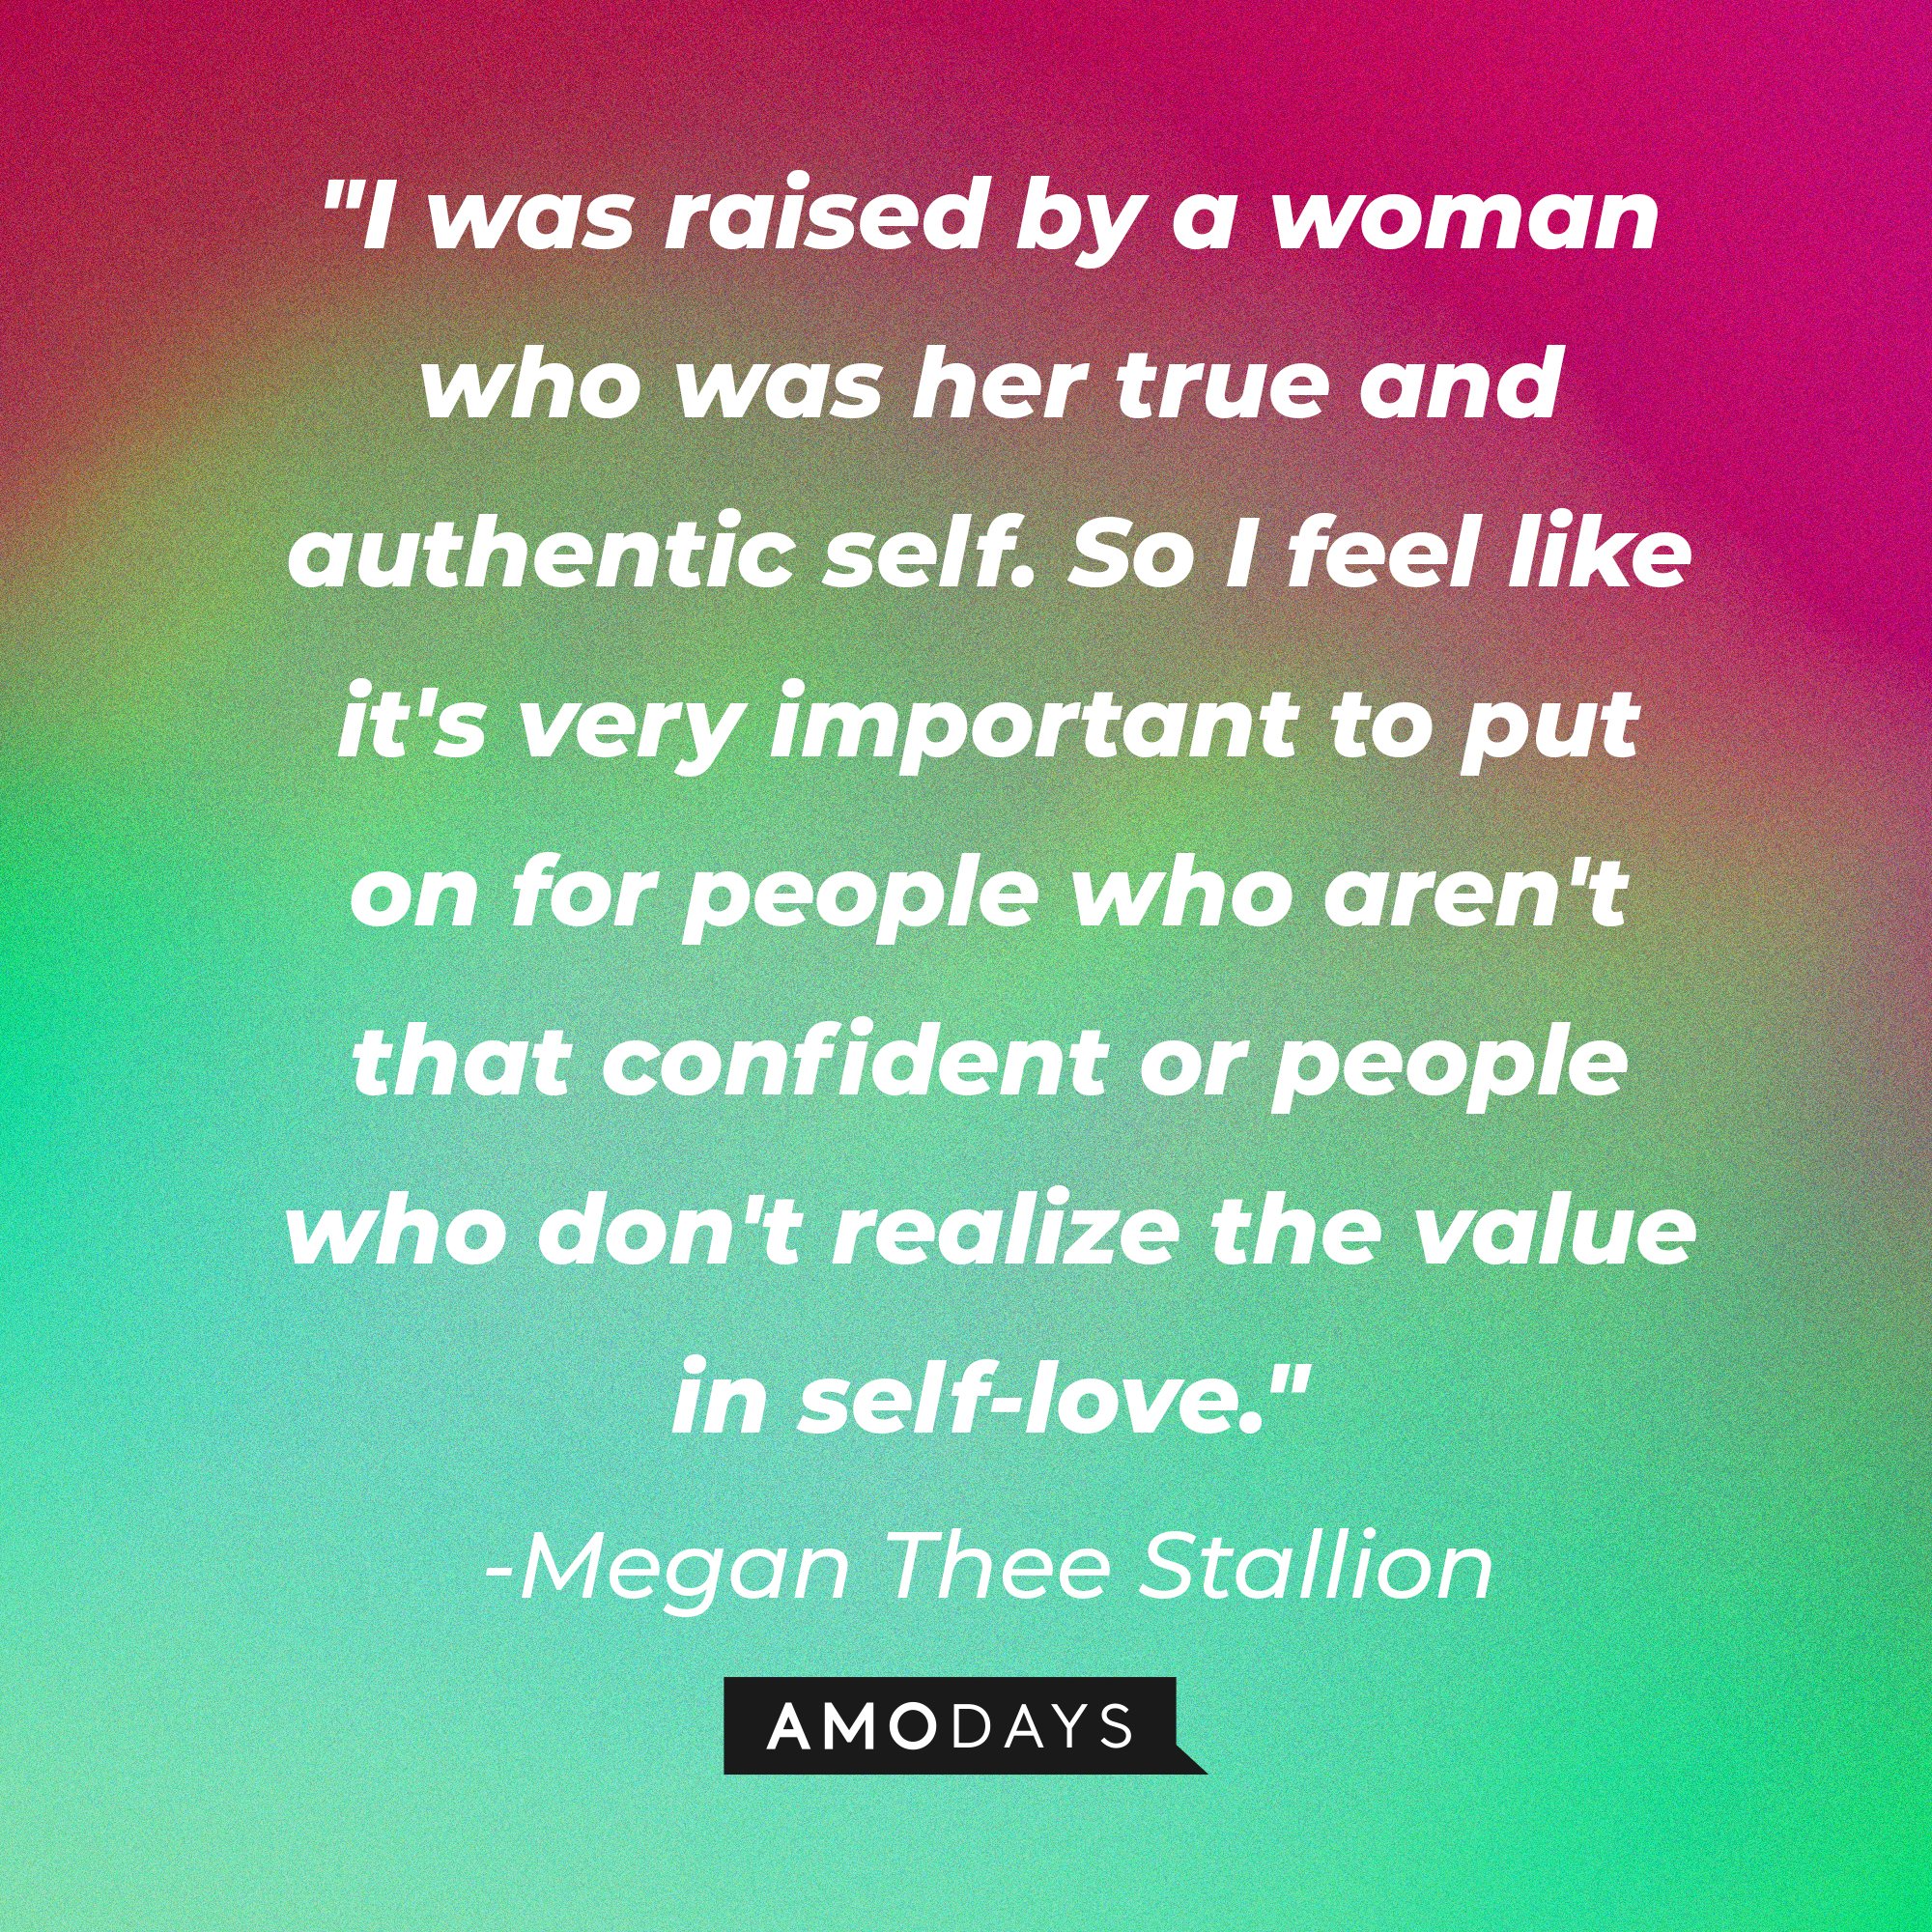 Megan Thee Stallion’s quote: "I was raised by a woman who was her true and authentic self. So I feel like it's very important to put on for people who aren't that confident or people who don't realize the value in self-love." | Image: AmoDays